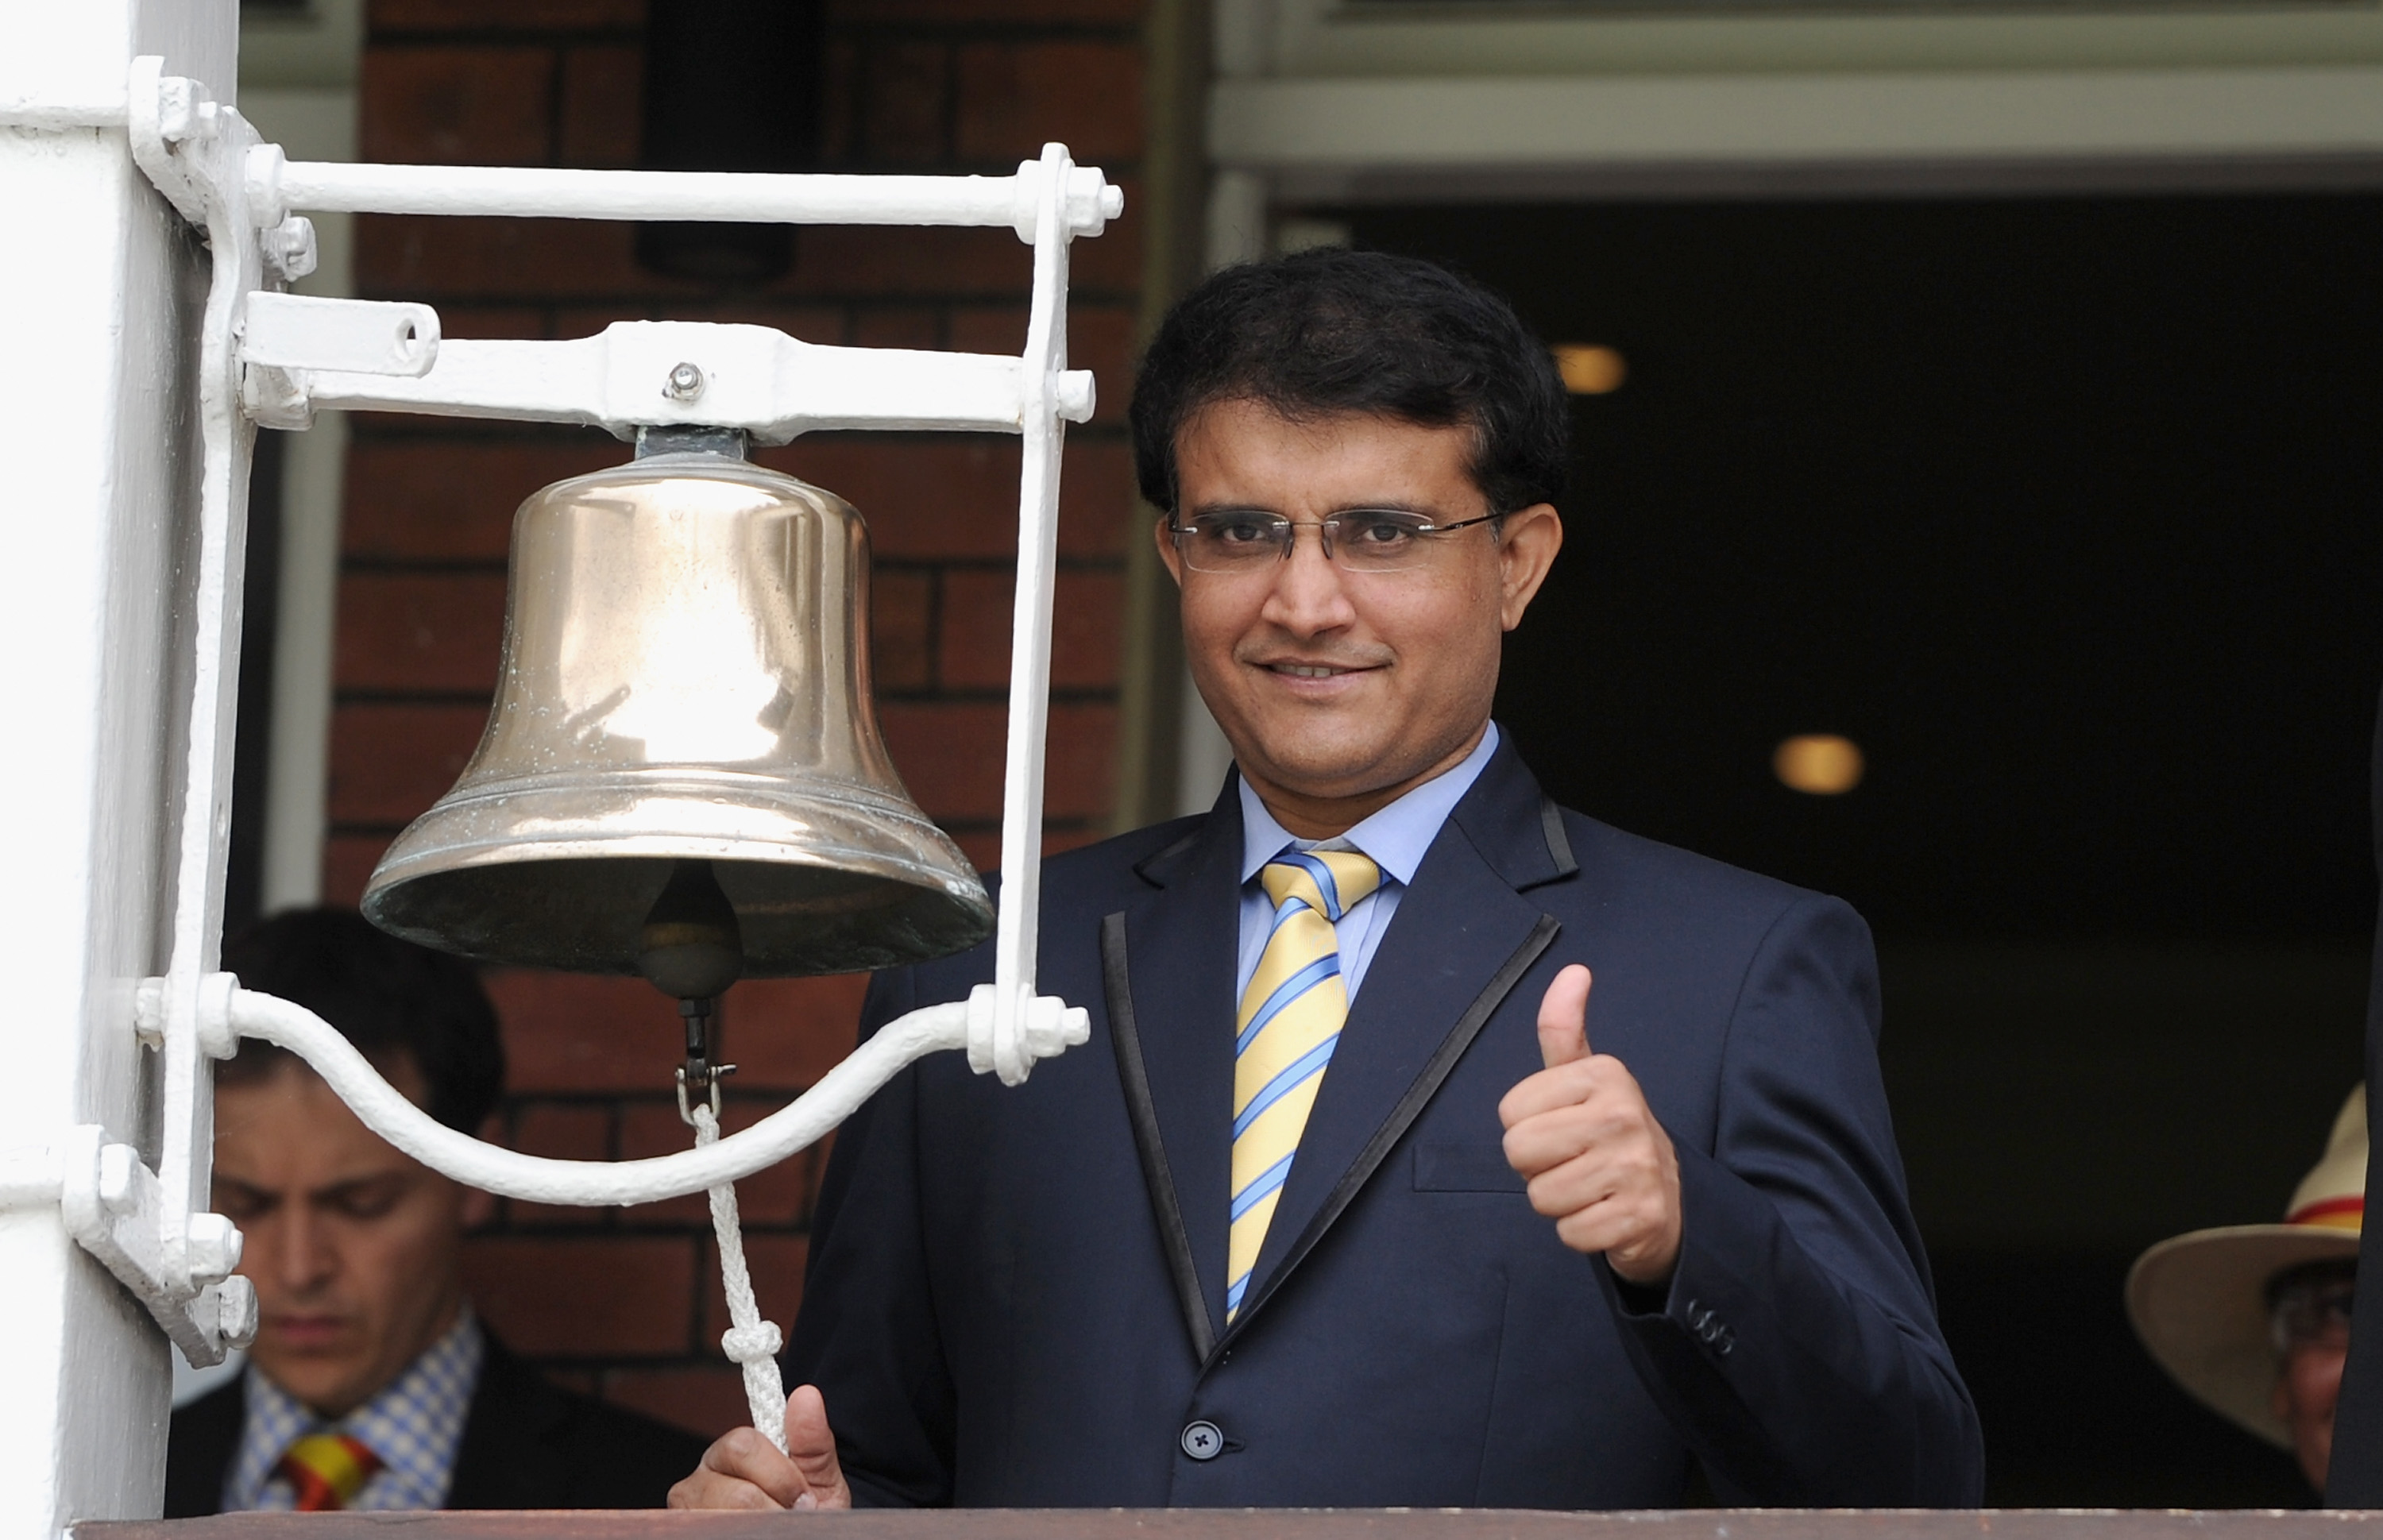 Sourav Ganguly inducted into ICC Board as India’s representative, states ICC